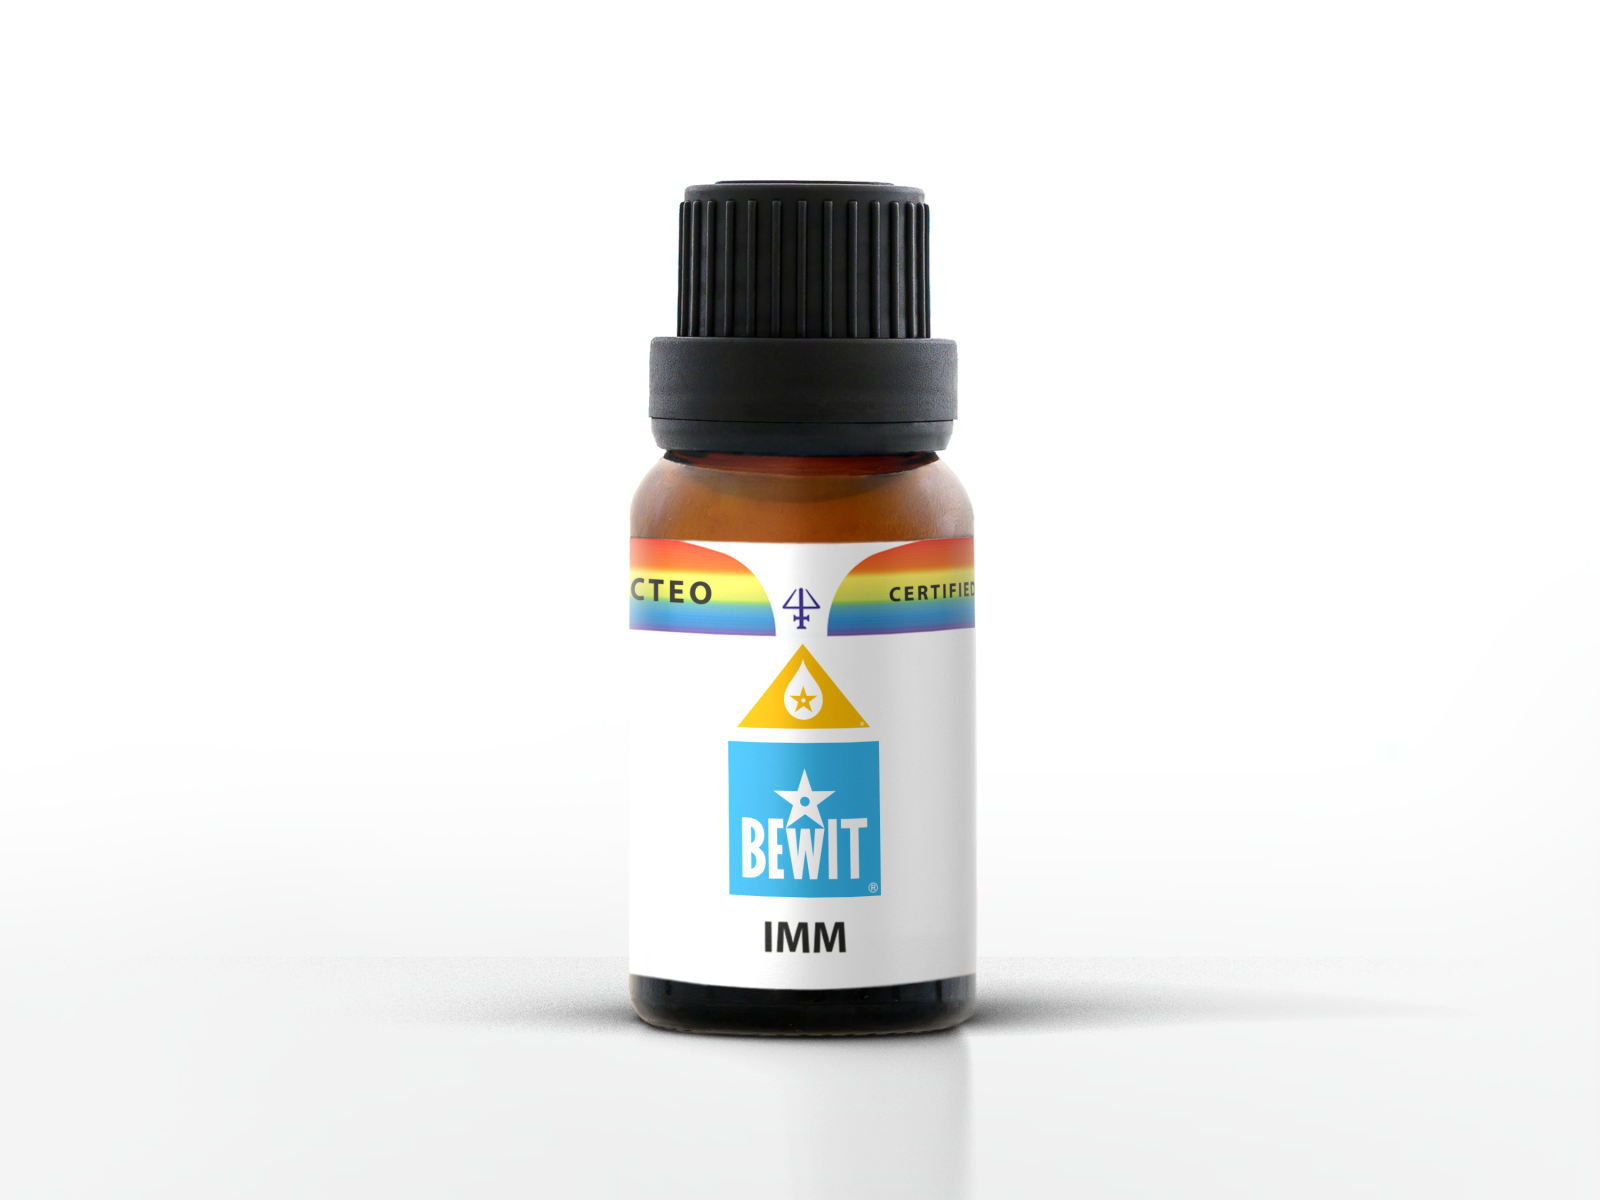 BEWIT IMM - Blend of the essential oils, 15 ml